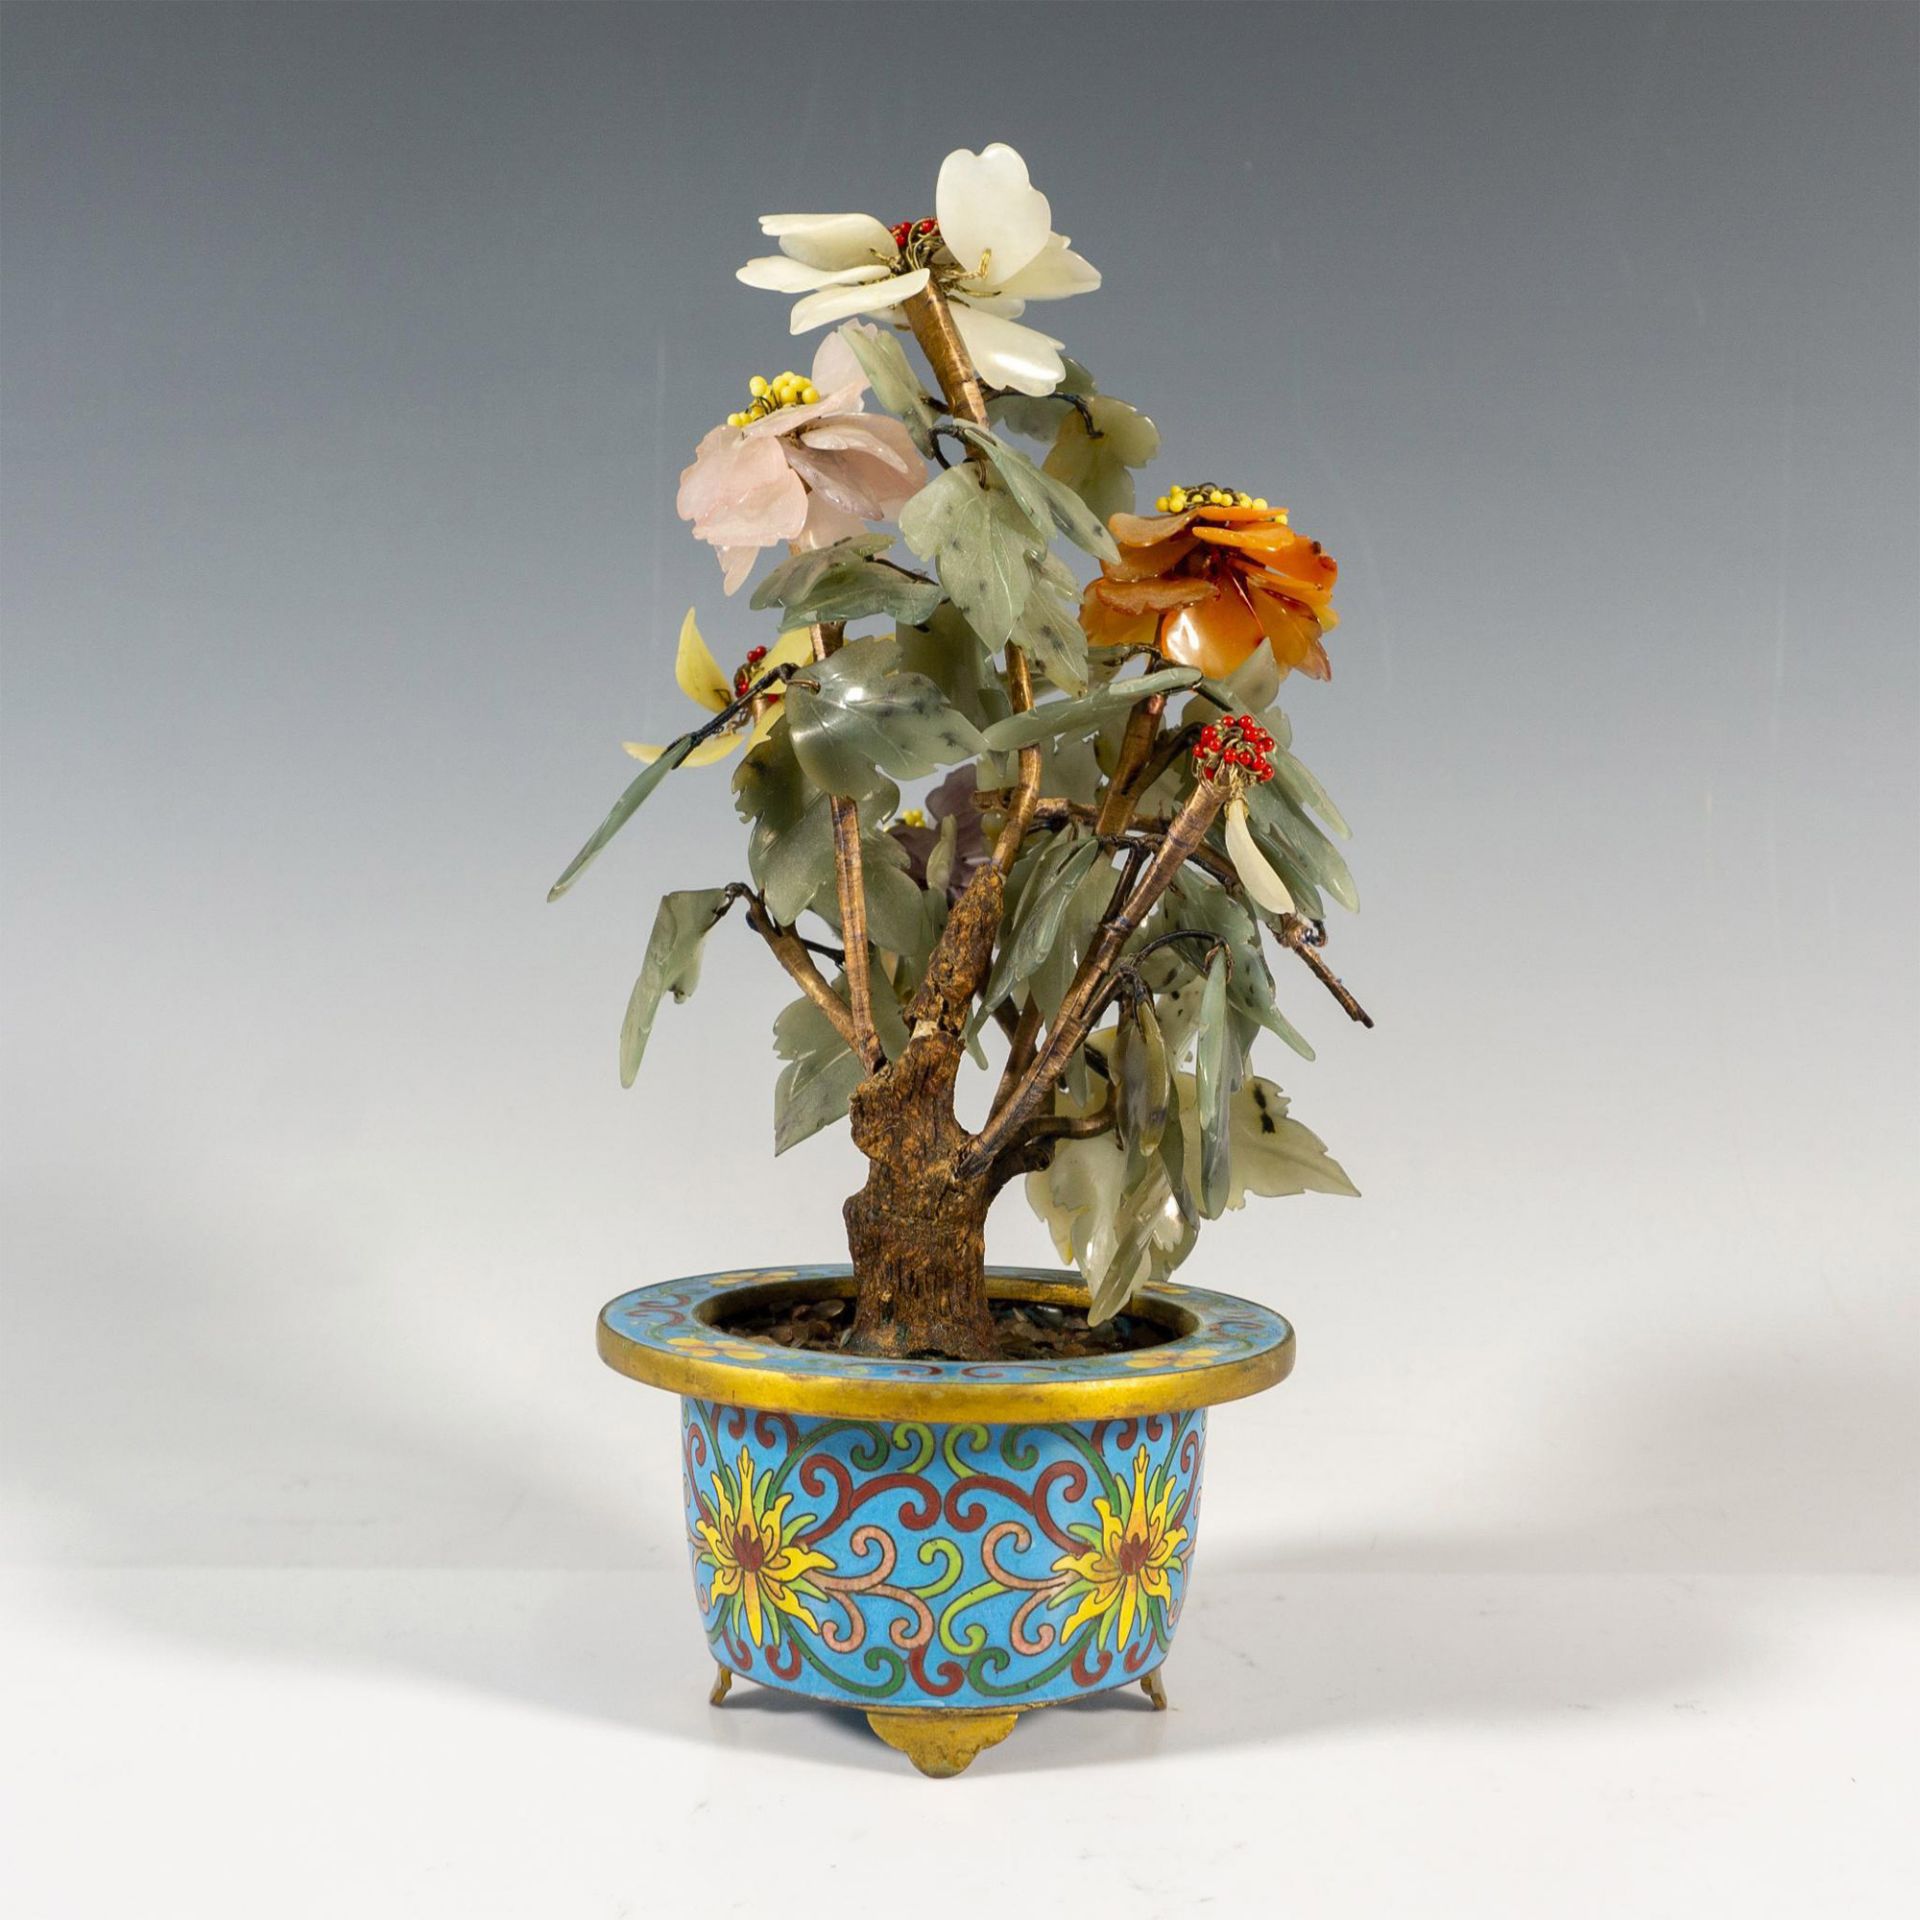 Chinese Cloisonne and Semi-Precious Stones Bonsai Tree - Image 2 of 3